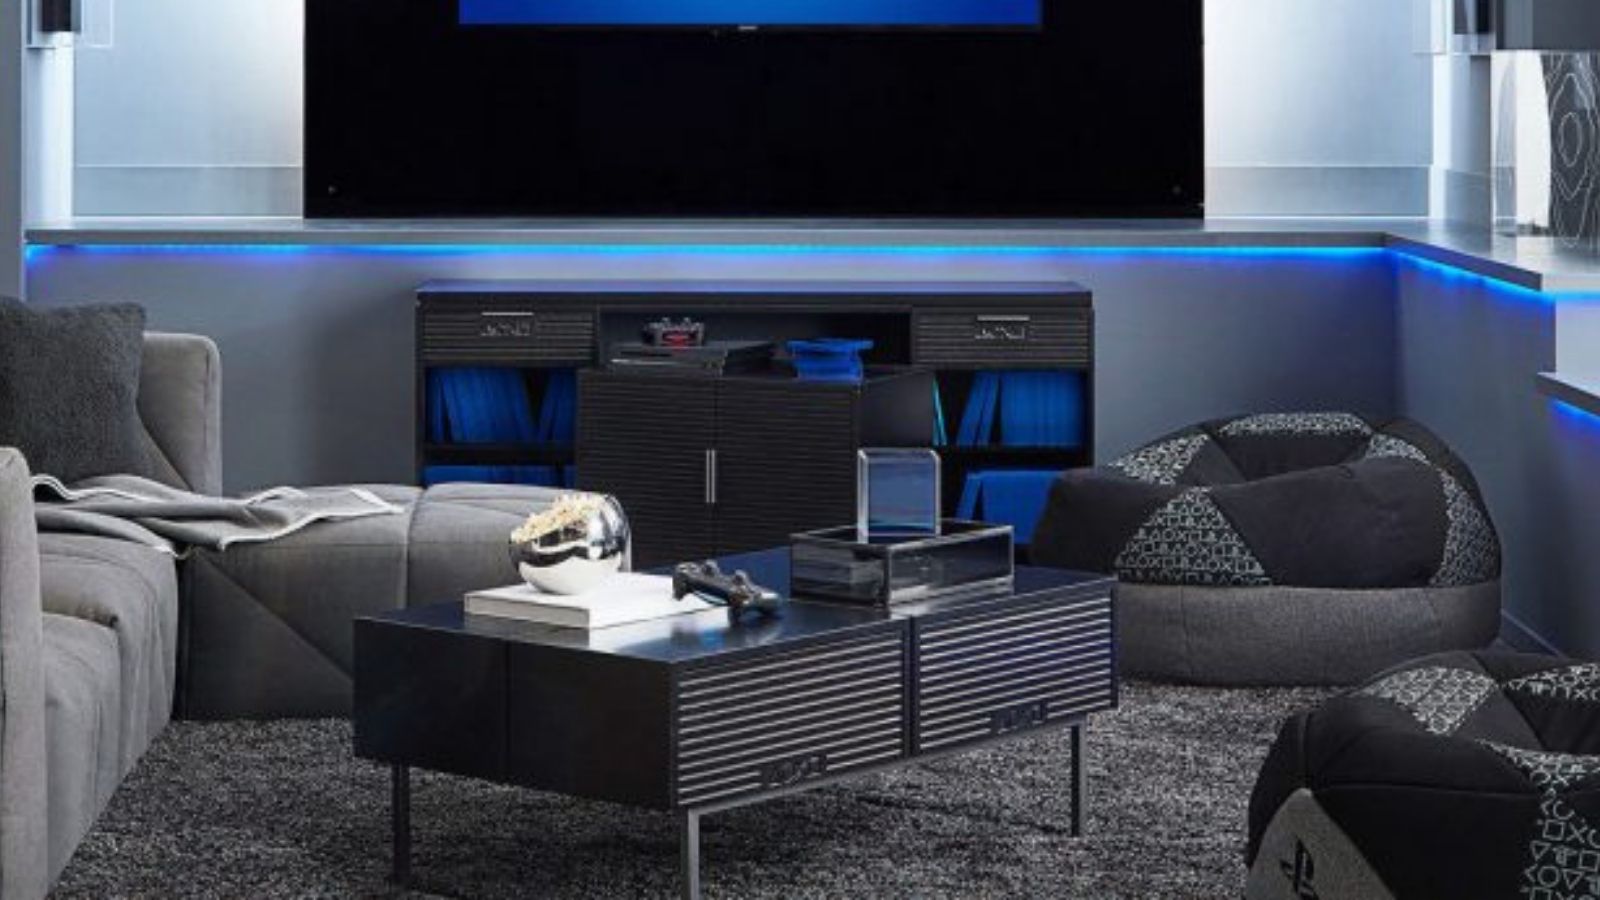 This Official PlayStationBranded Furniture Is Super Neat And Perfect To Match Your Console